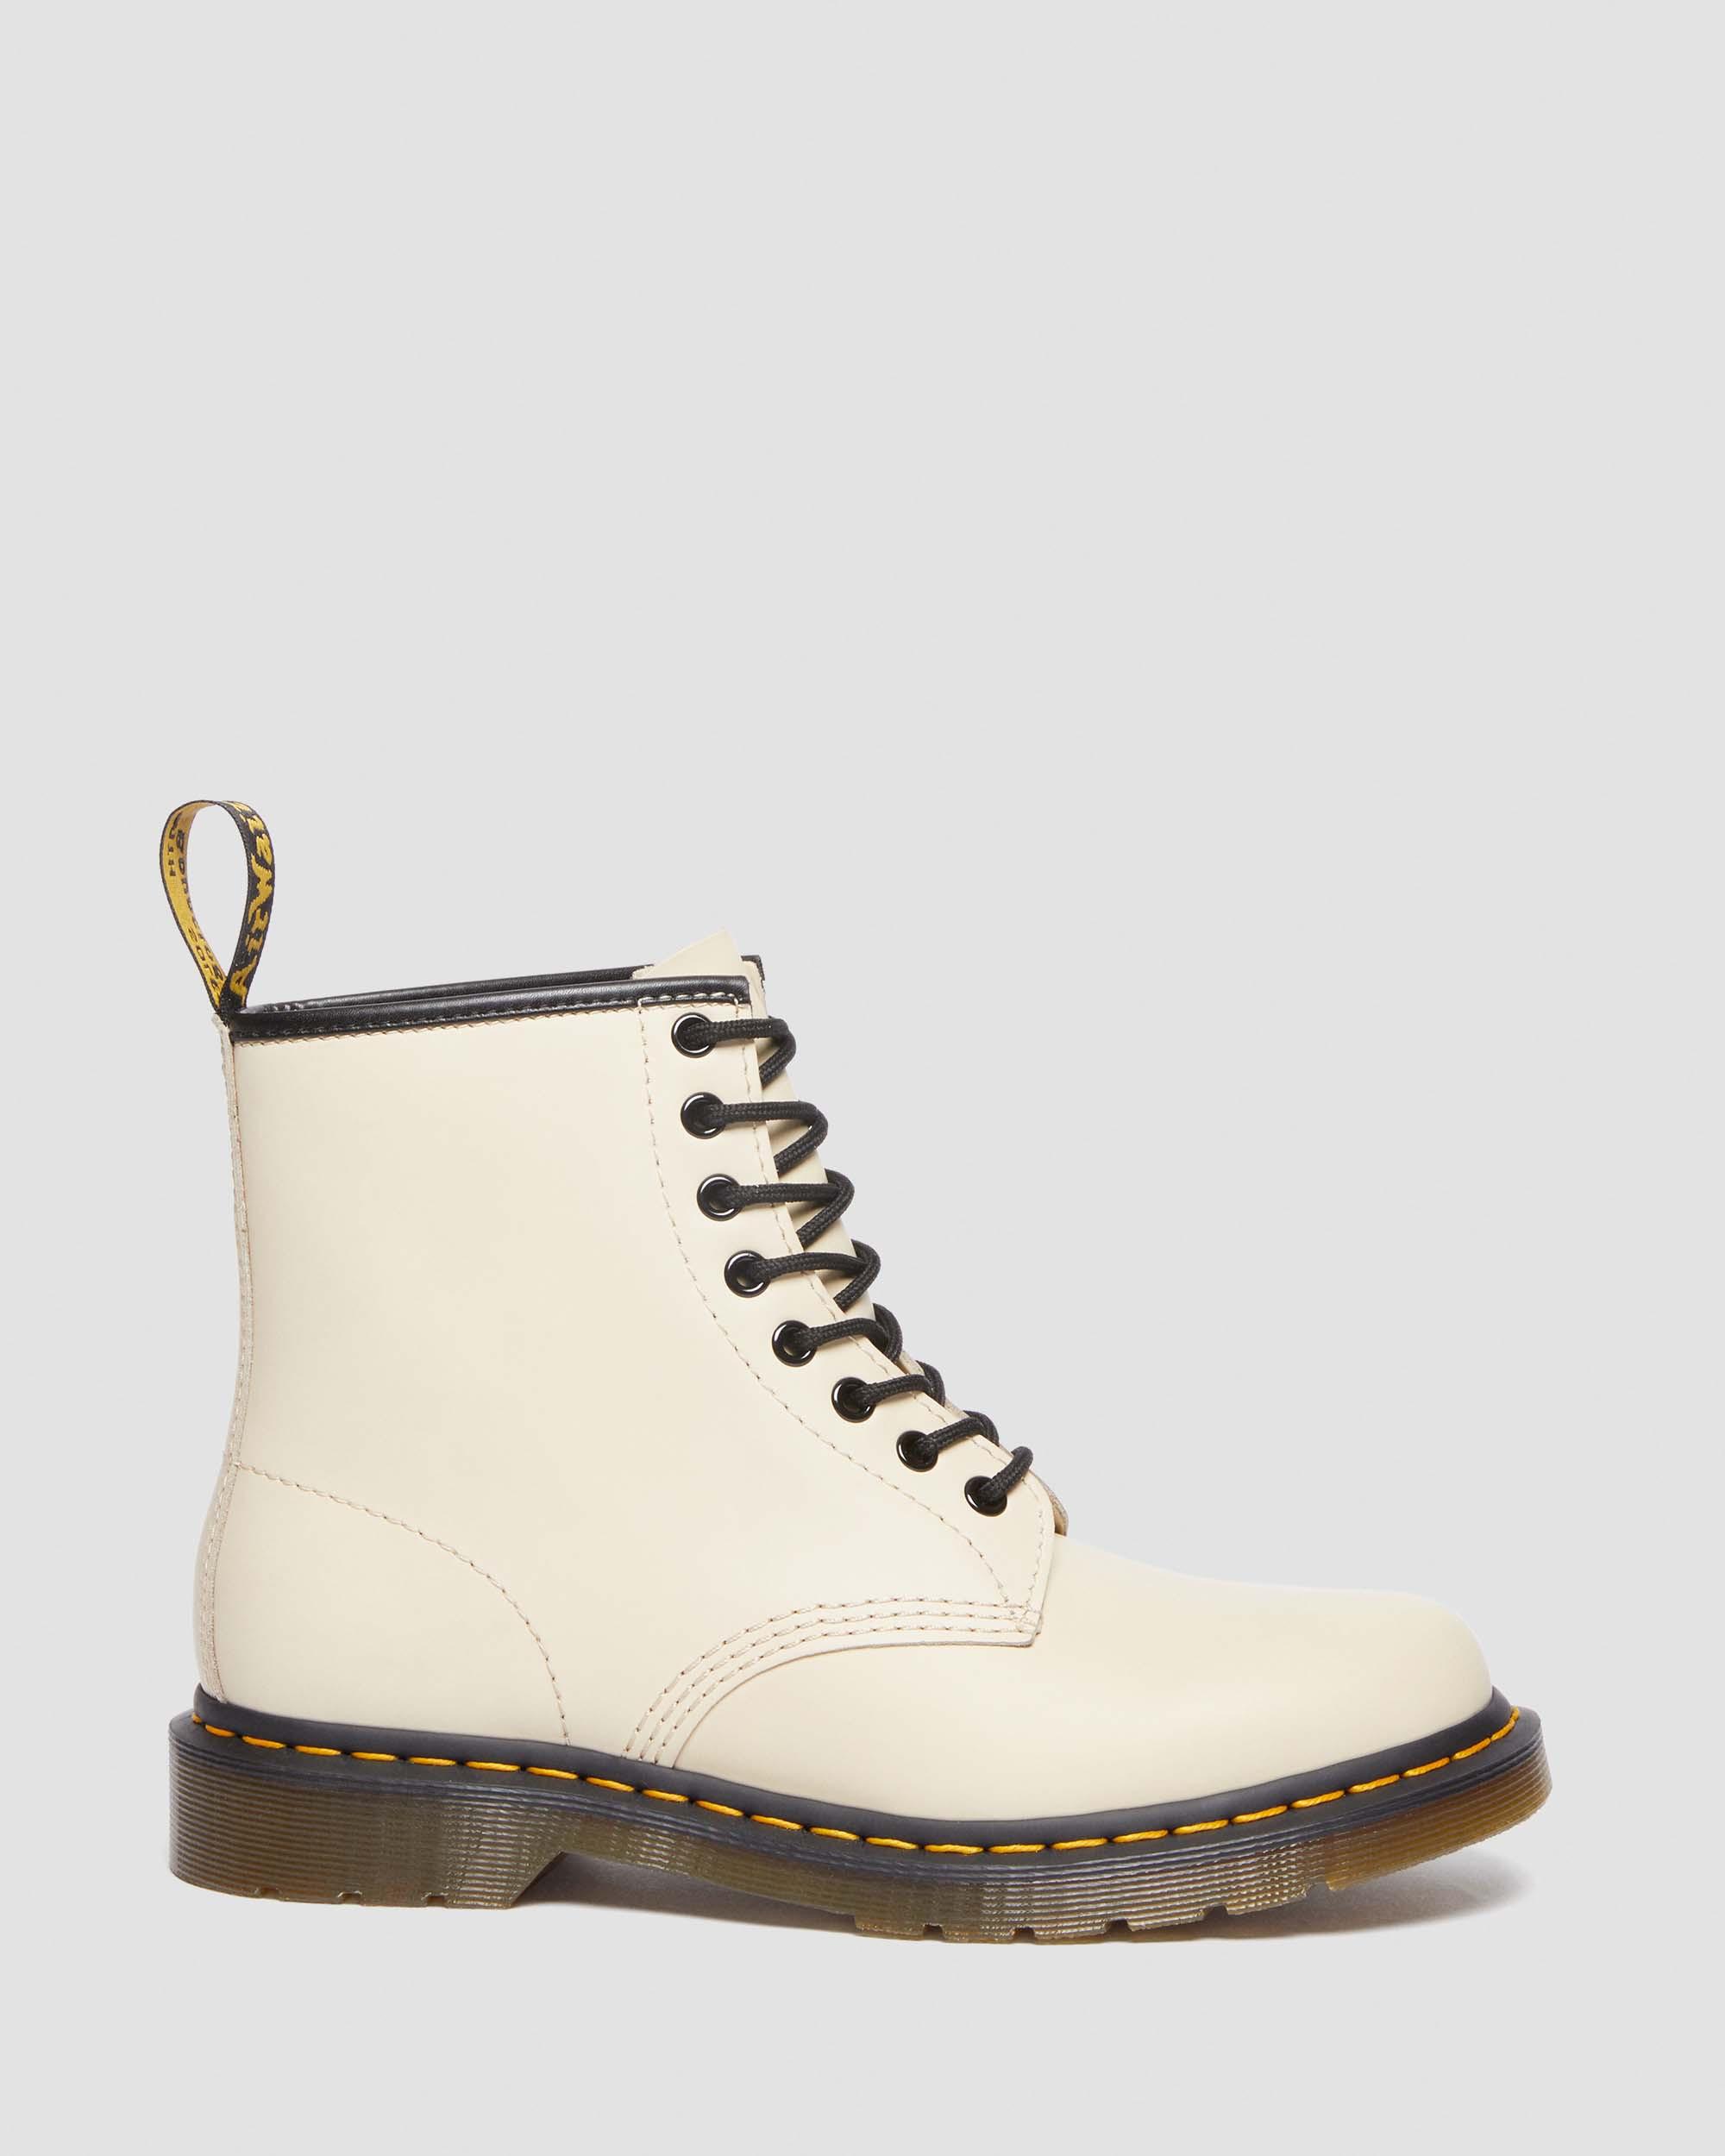 Up Boots Lace Leather Parchment in | Beige Smooth 1460 Martens Dr.